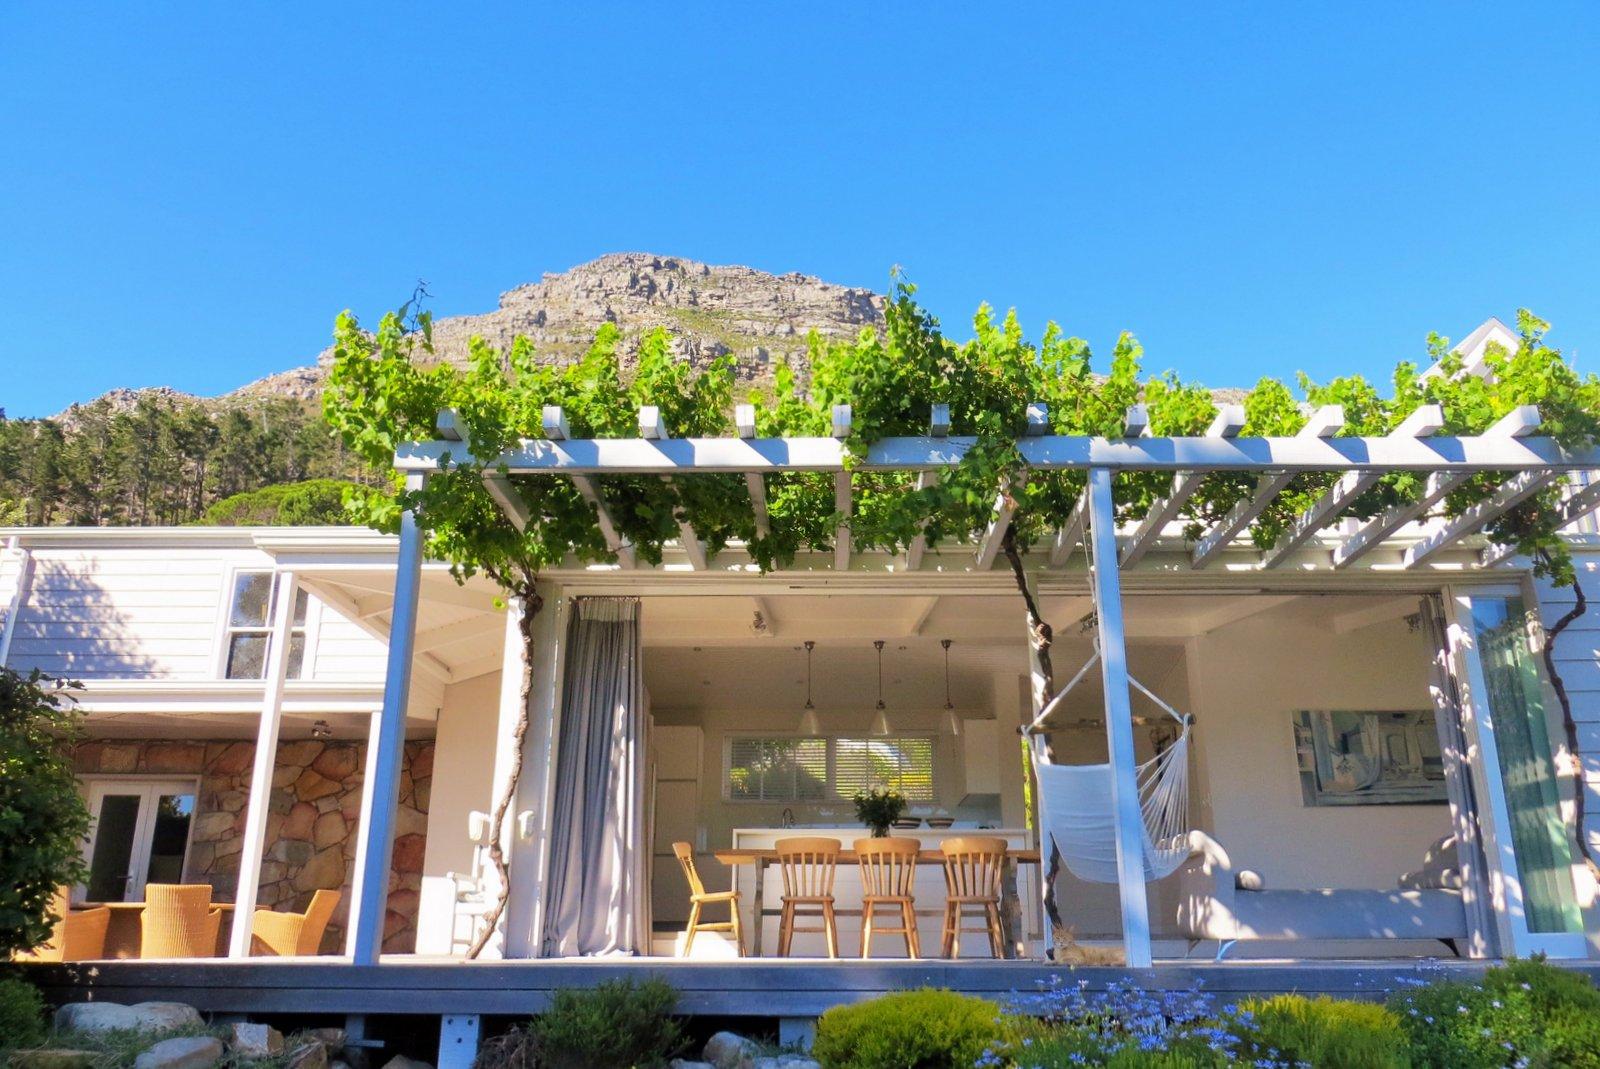 Photo 5 of Riverstone Villa accommodation in Hout Bay, Cape Town with 4 bedrooms and 3 bathrooms